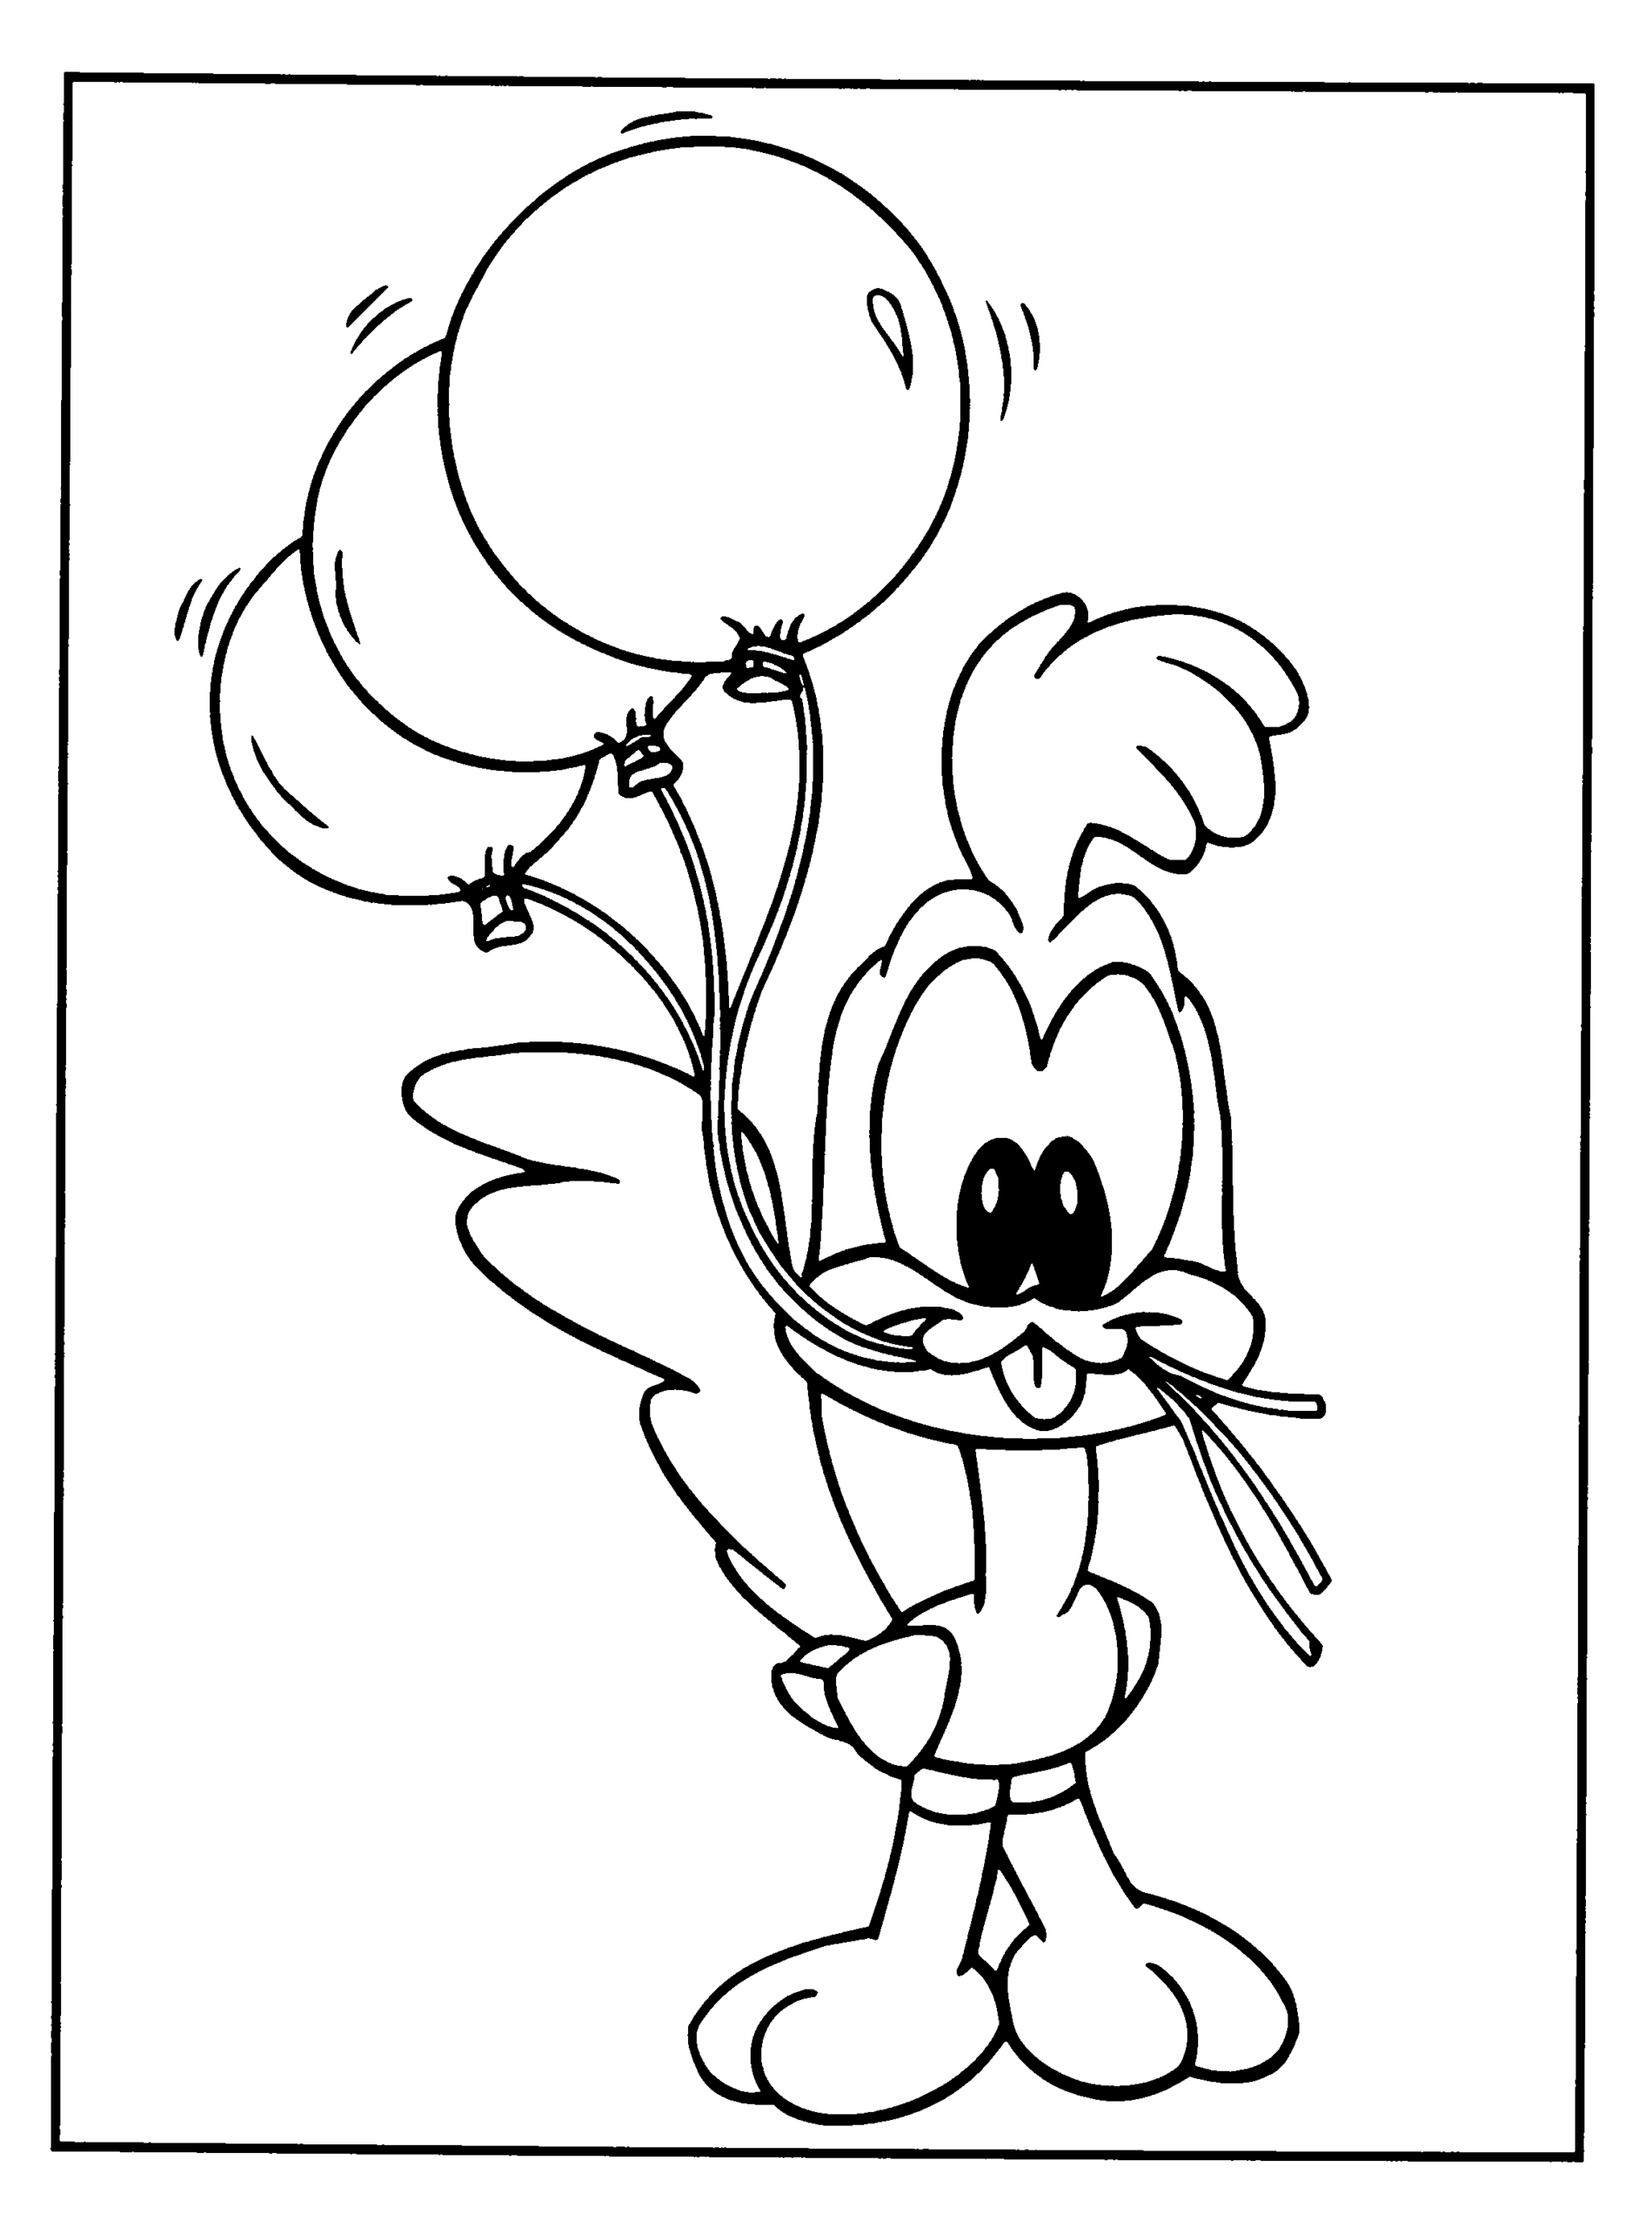 Baby Looney Tunes Coloring Pages TV Film baby looney tunes 8 Printable 2020 00479 Coloring4free